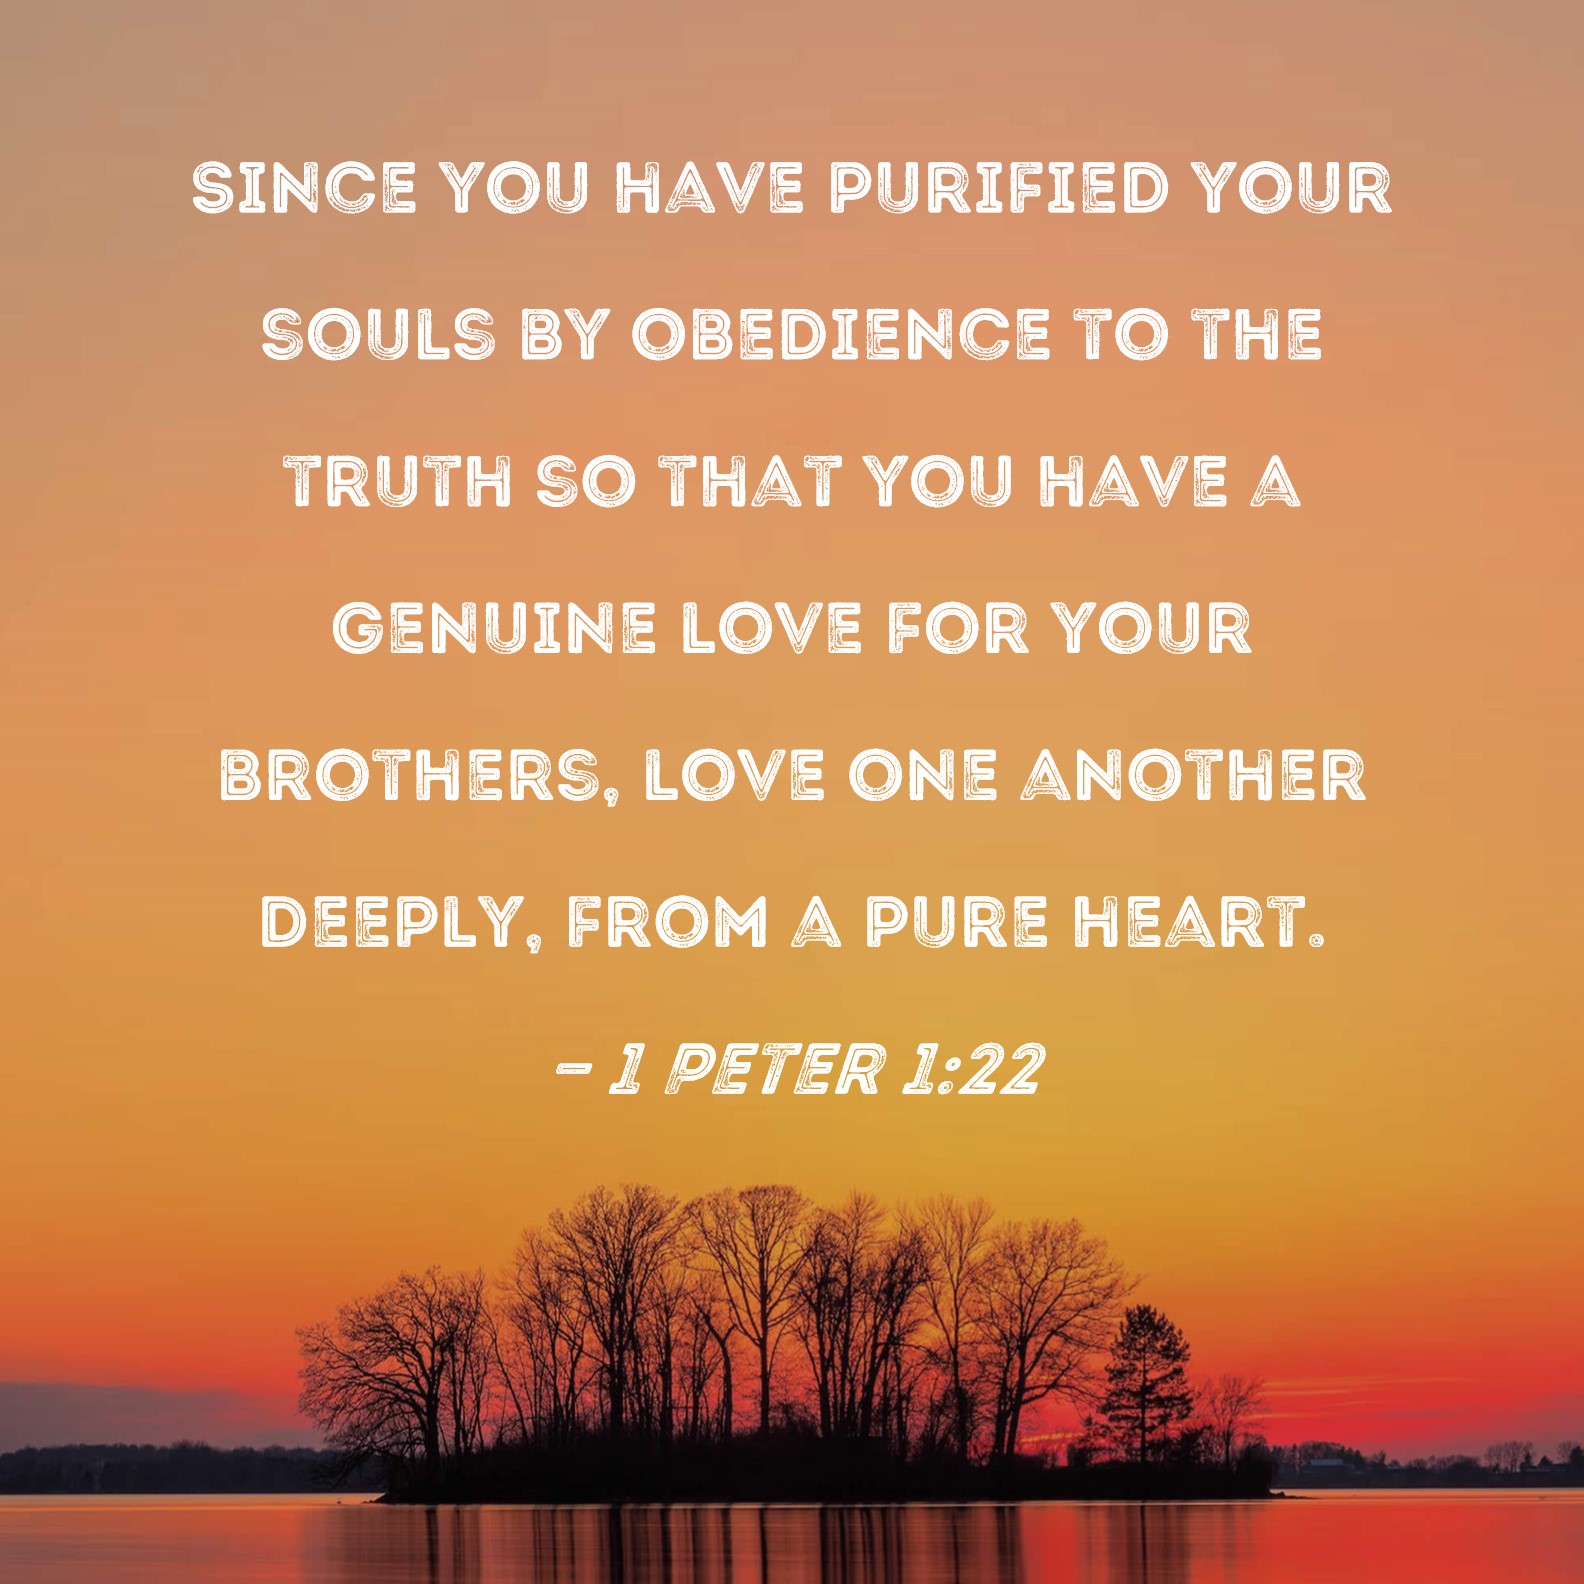 Pure love is the true sign of every true disciple of Jesus Christ